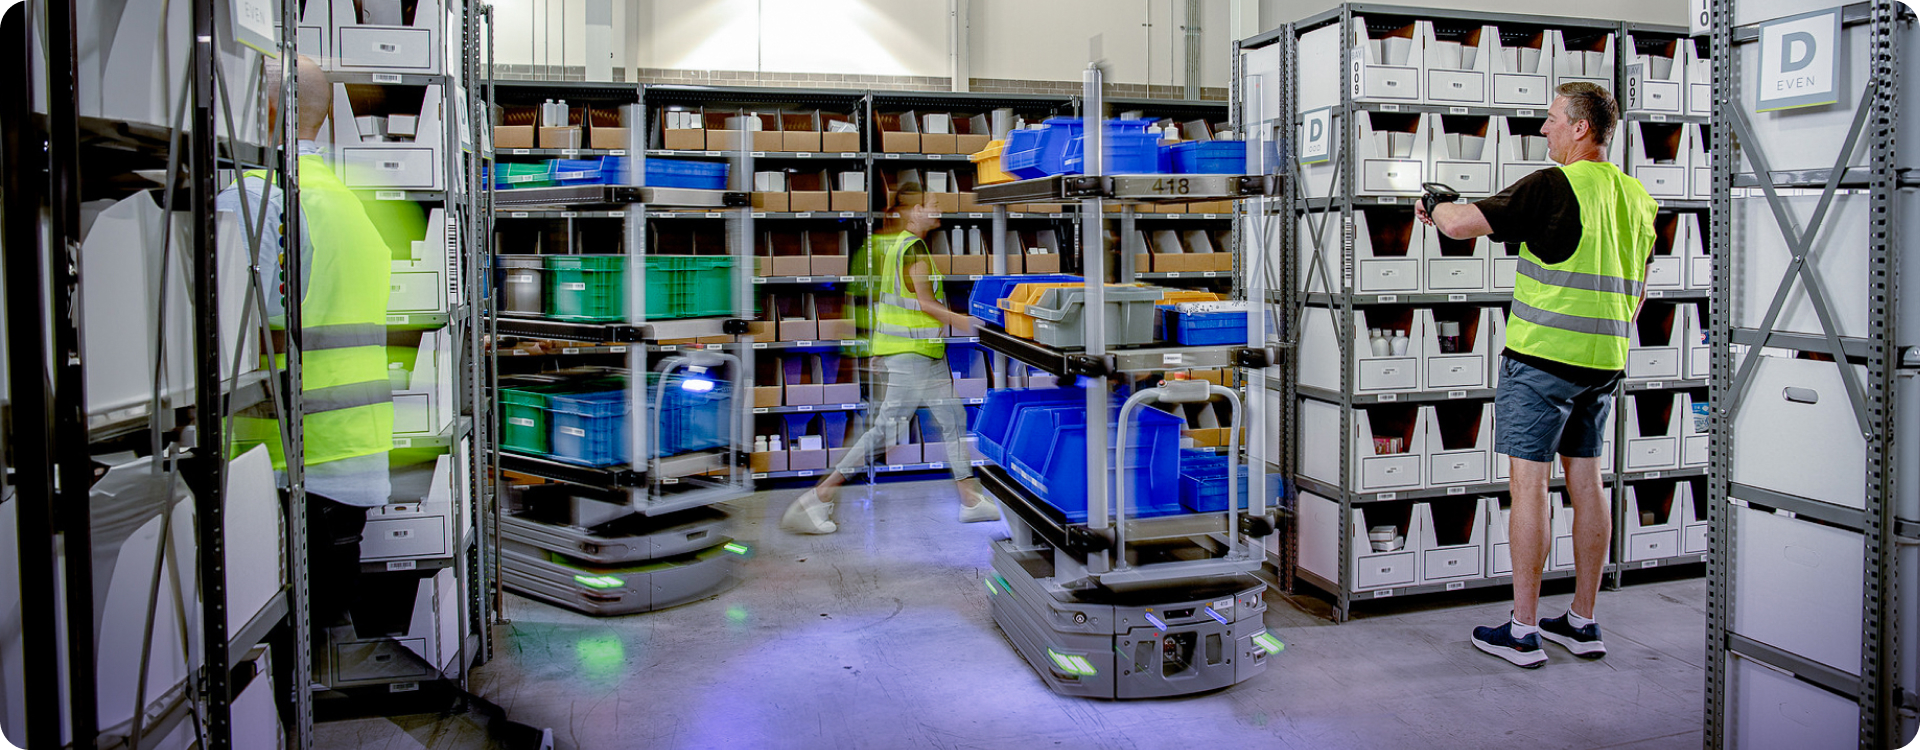 Lumabots and human pickers in a distribution center